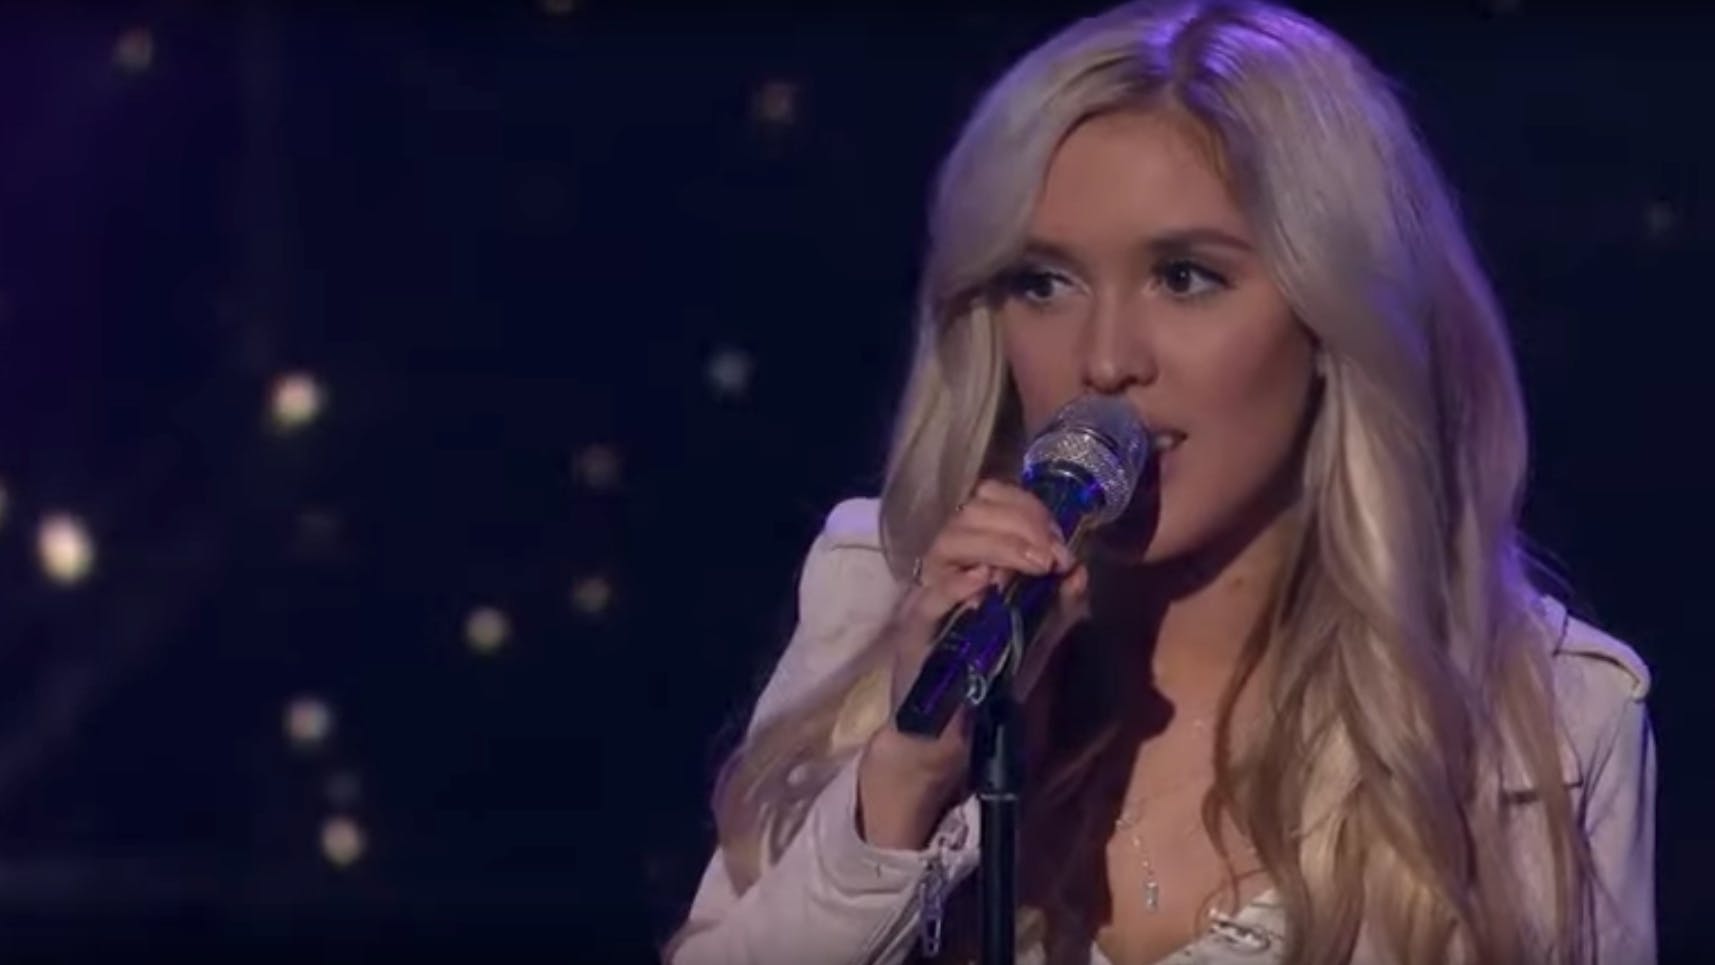 Watch This American Idol Contestant Cover blink-182's I Miss You